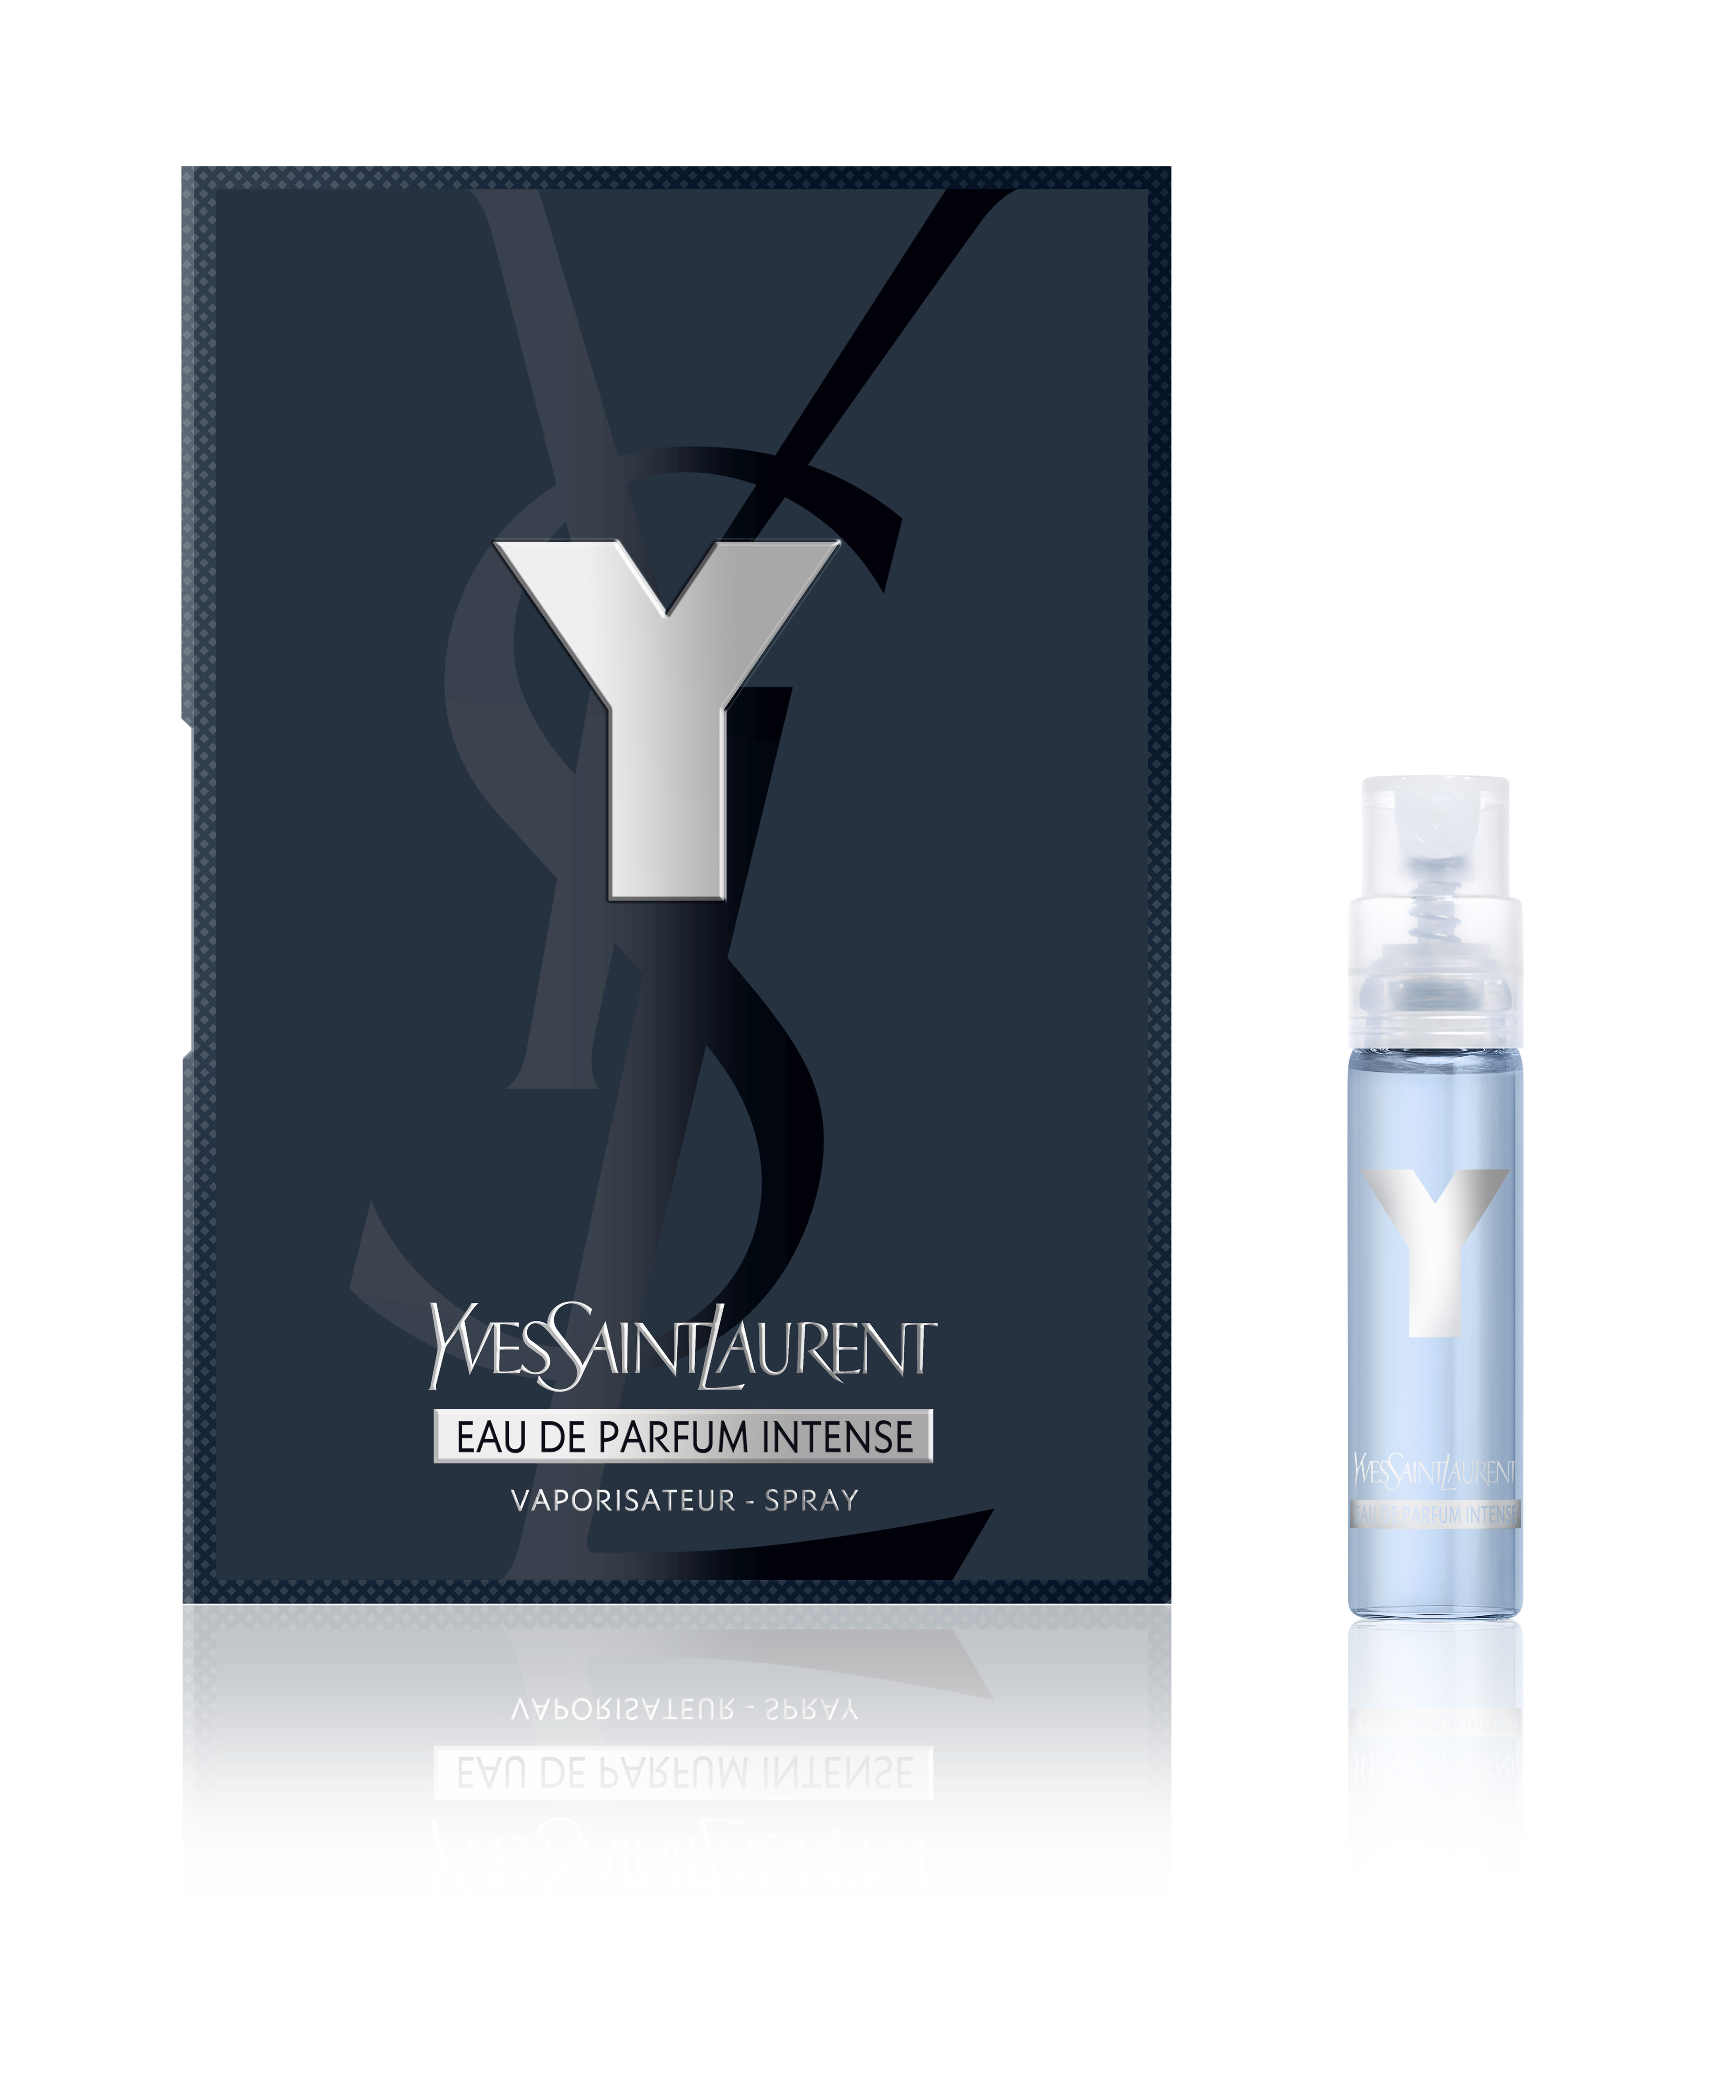 Purchase YSL Y and receive a sample size to try